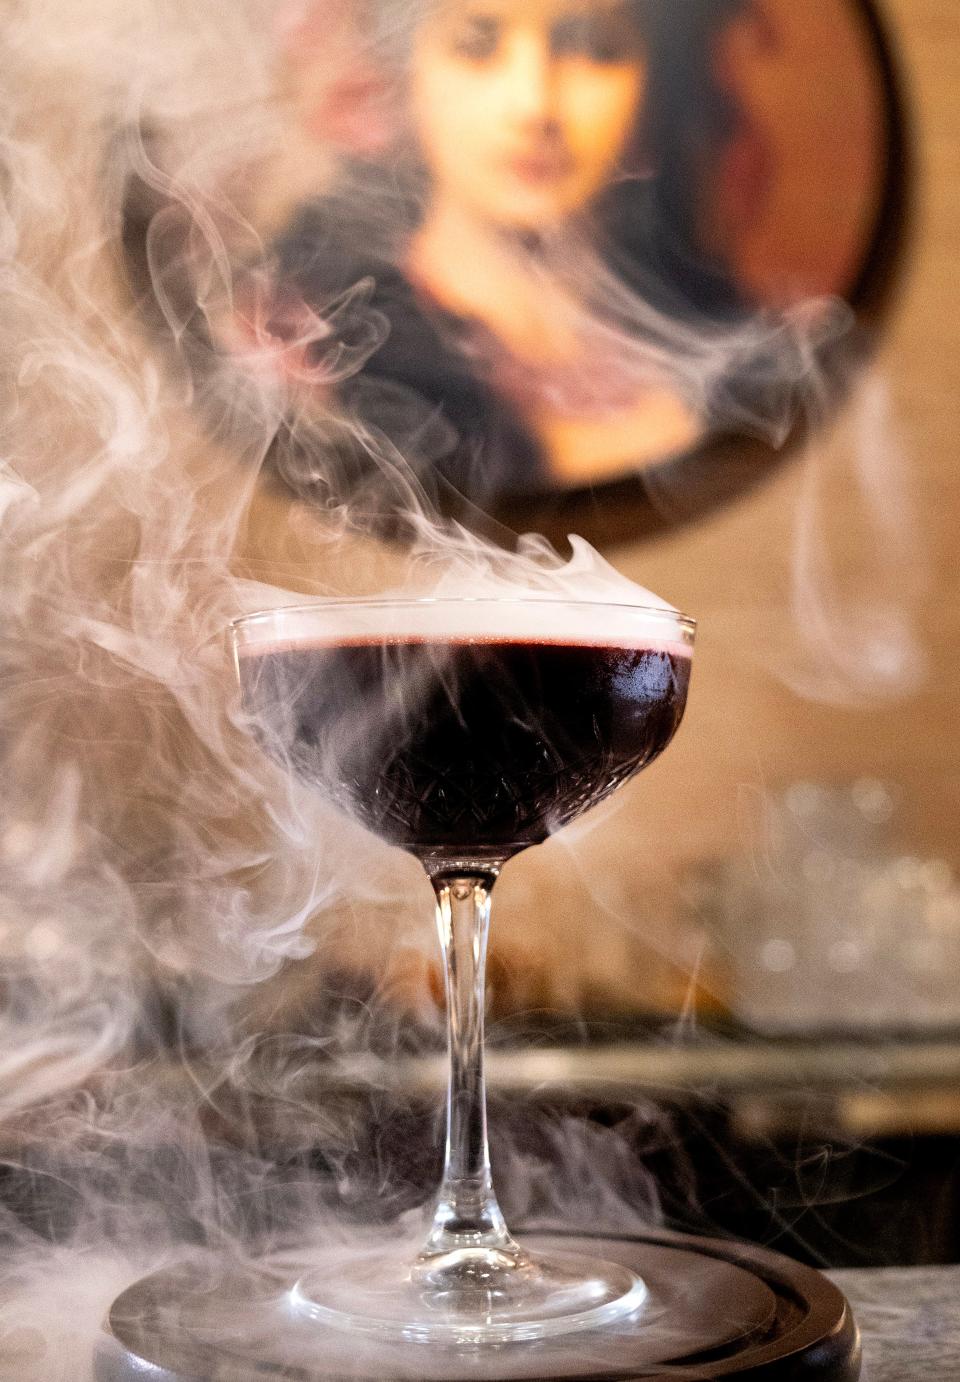 A drink called "A Shot to Your Heart" is served up at The Madame, a speakeasy bar inside The Scottsdale Resort and Spa.